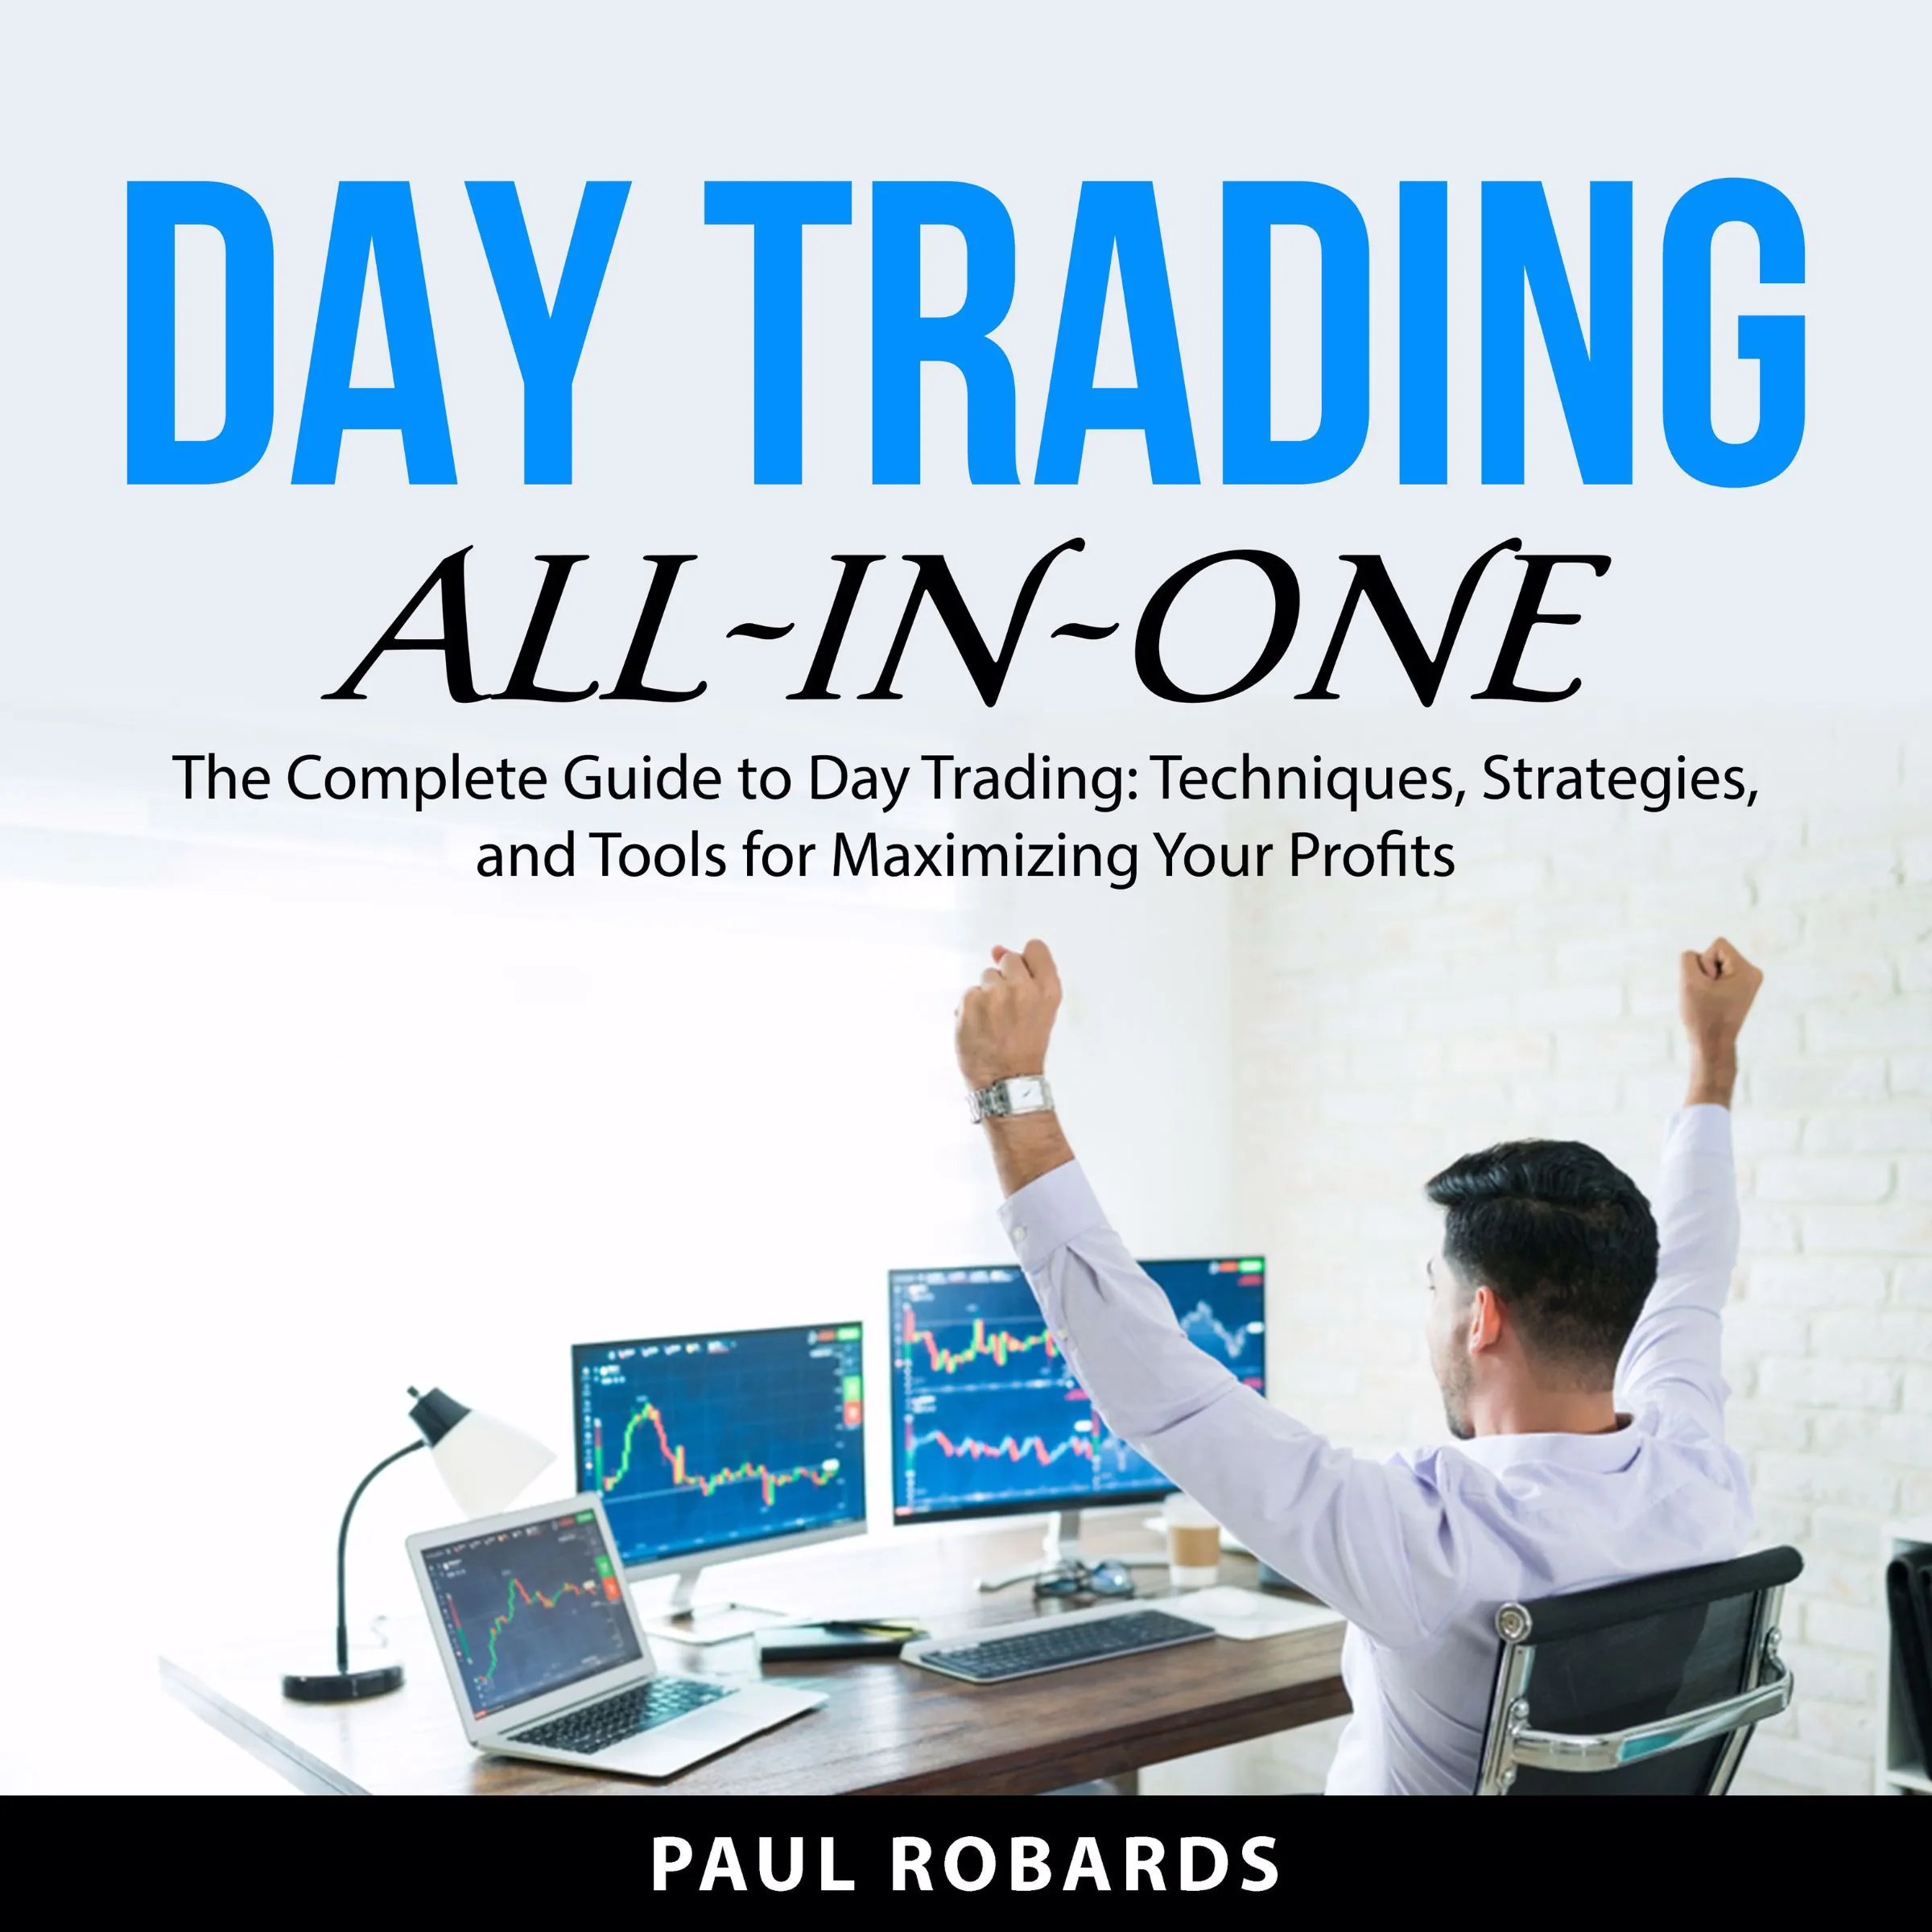 Day Trading All-in-One by Paul Robards Audiobook